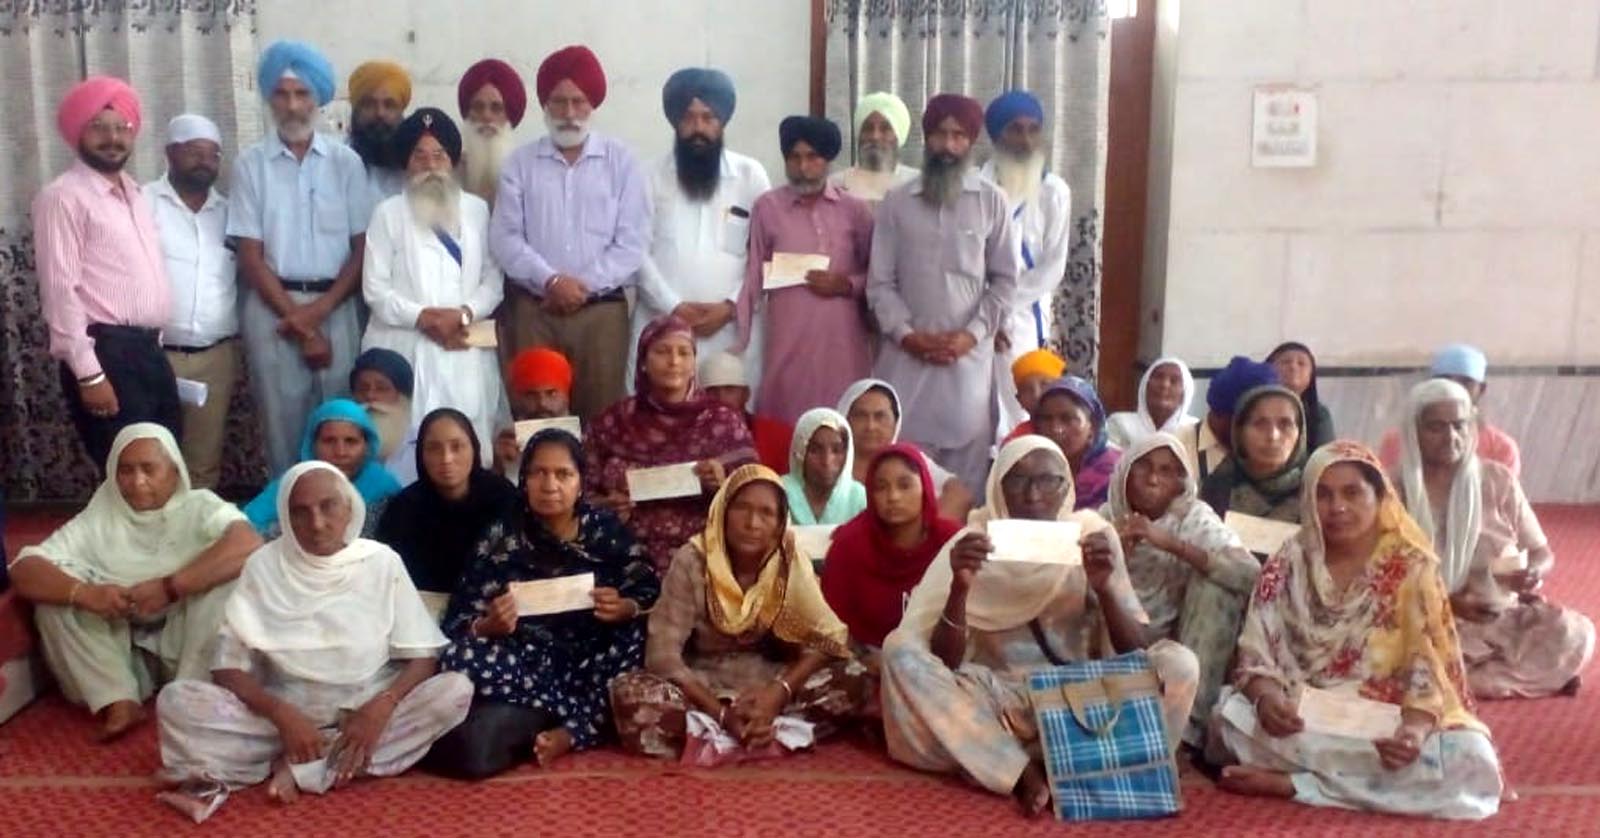 Sarbat da Bhala Charitable Trust distributes monthly pension checks to poor widows and disabled - Sidhu